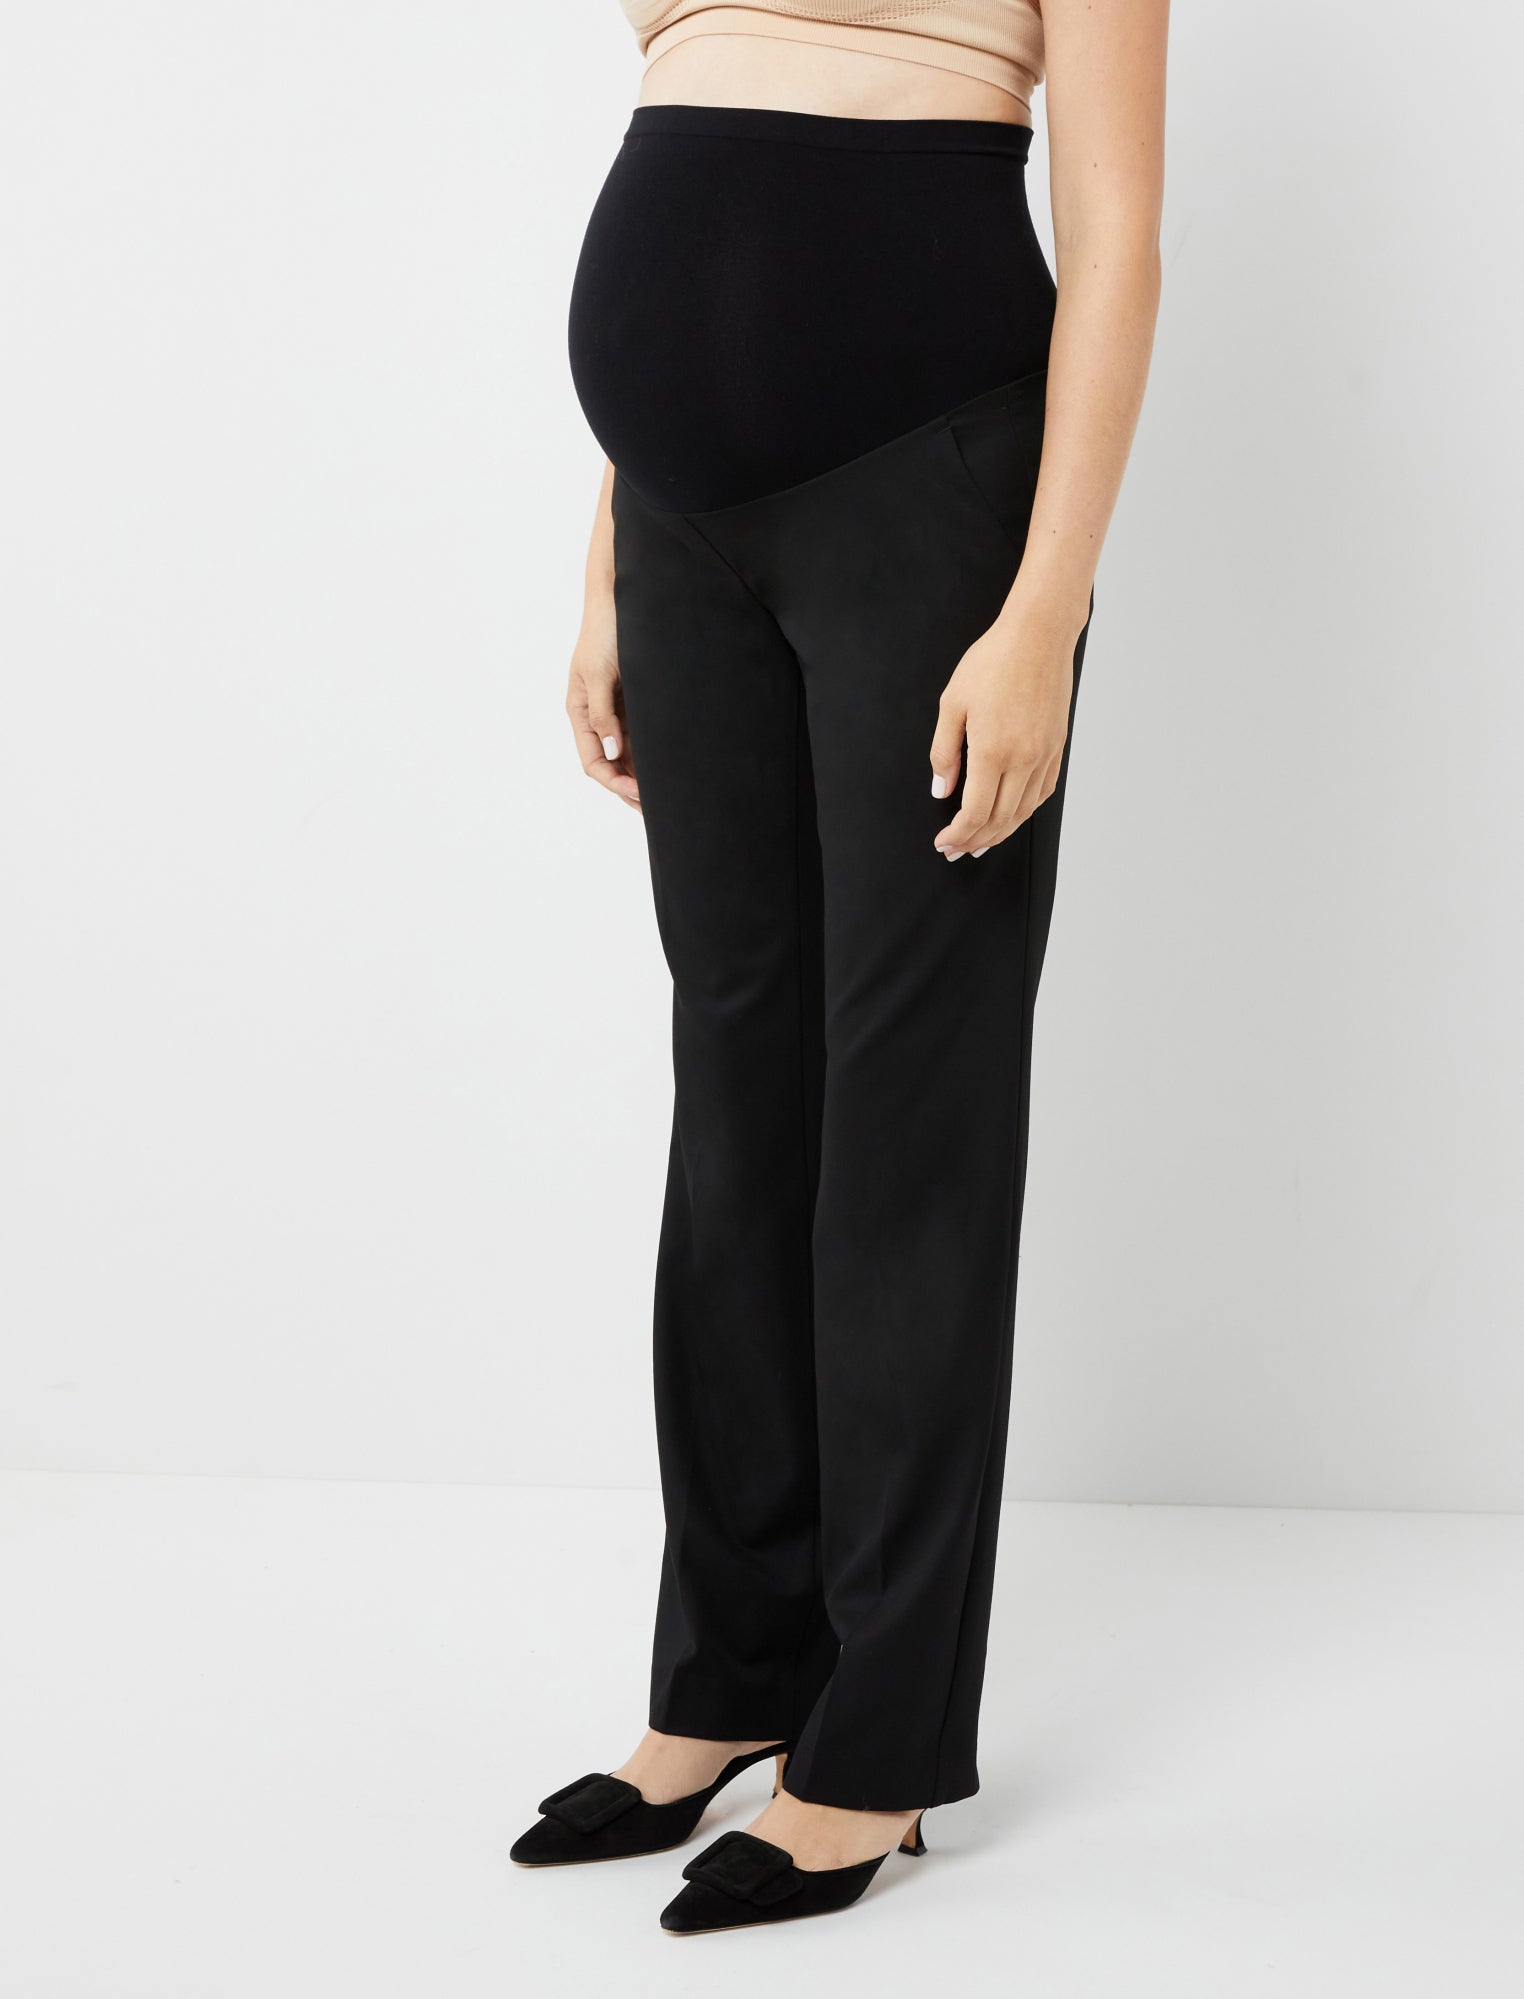 Beyond the Bump Spacedye Maternity Ankle Length Leggings - A Pea In the Pod